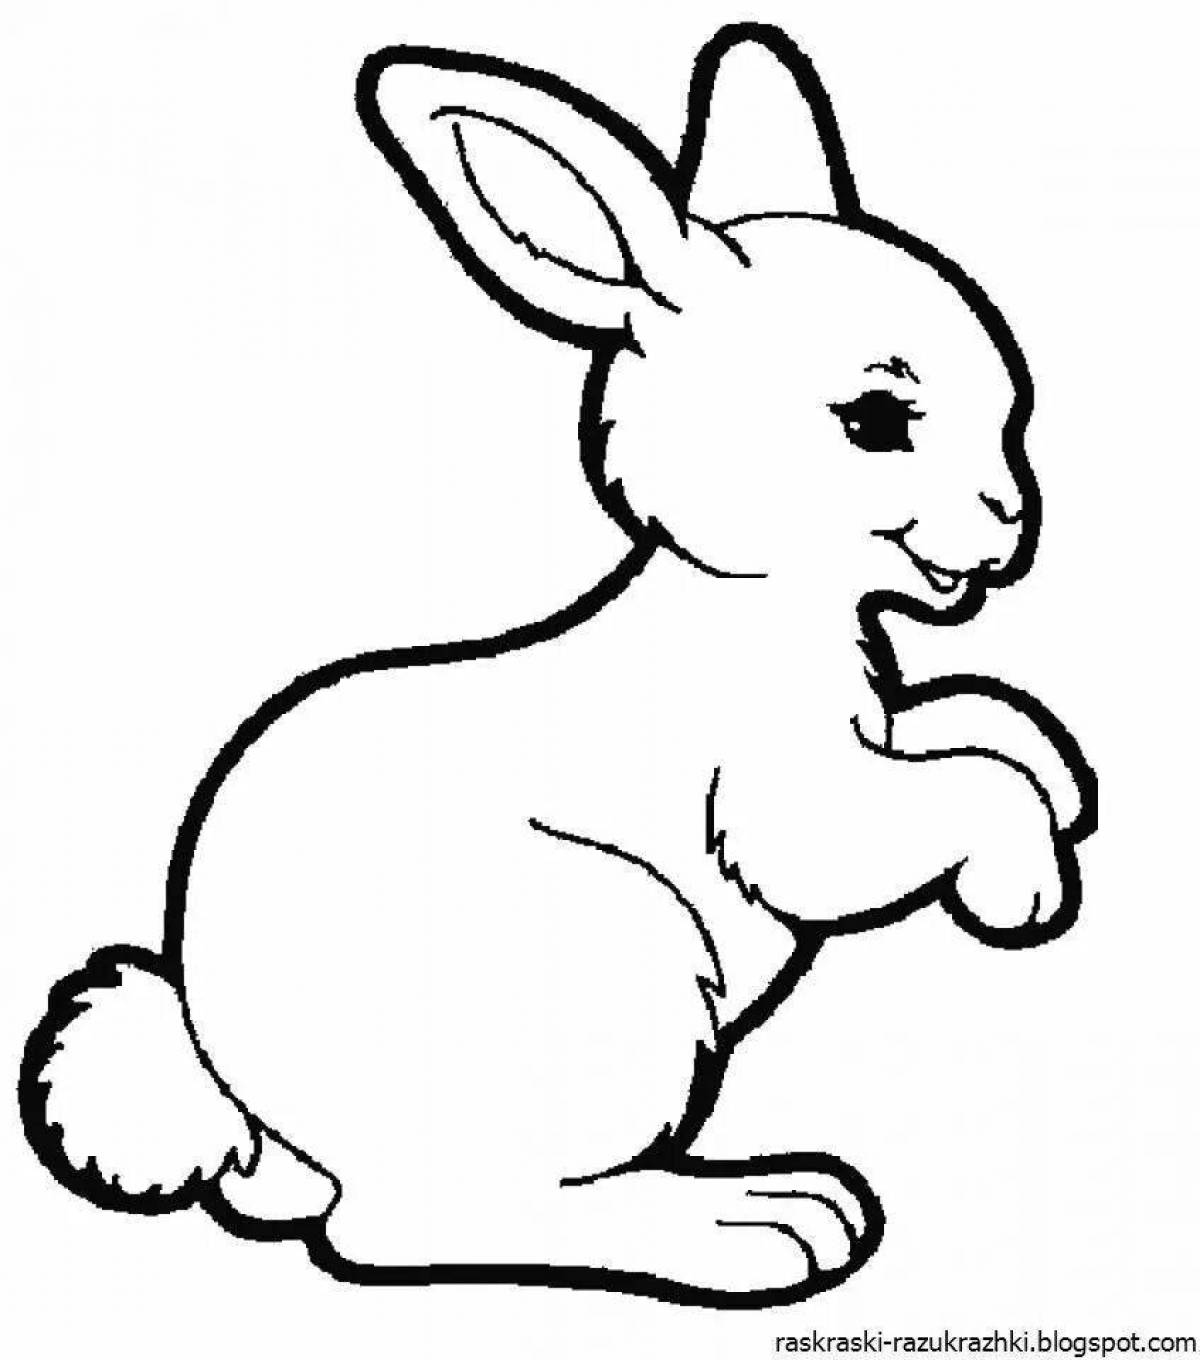 Adorable rabbit coloring book for kids